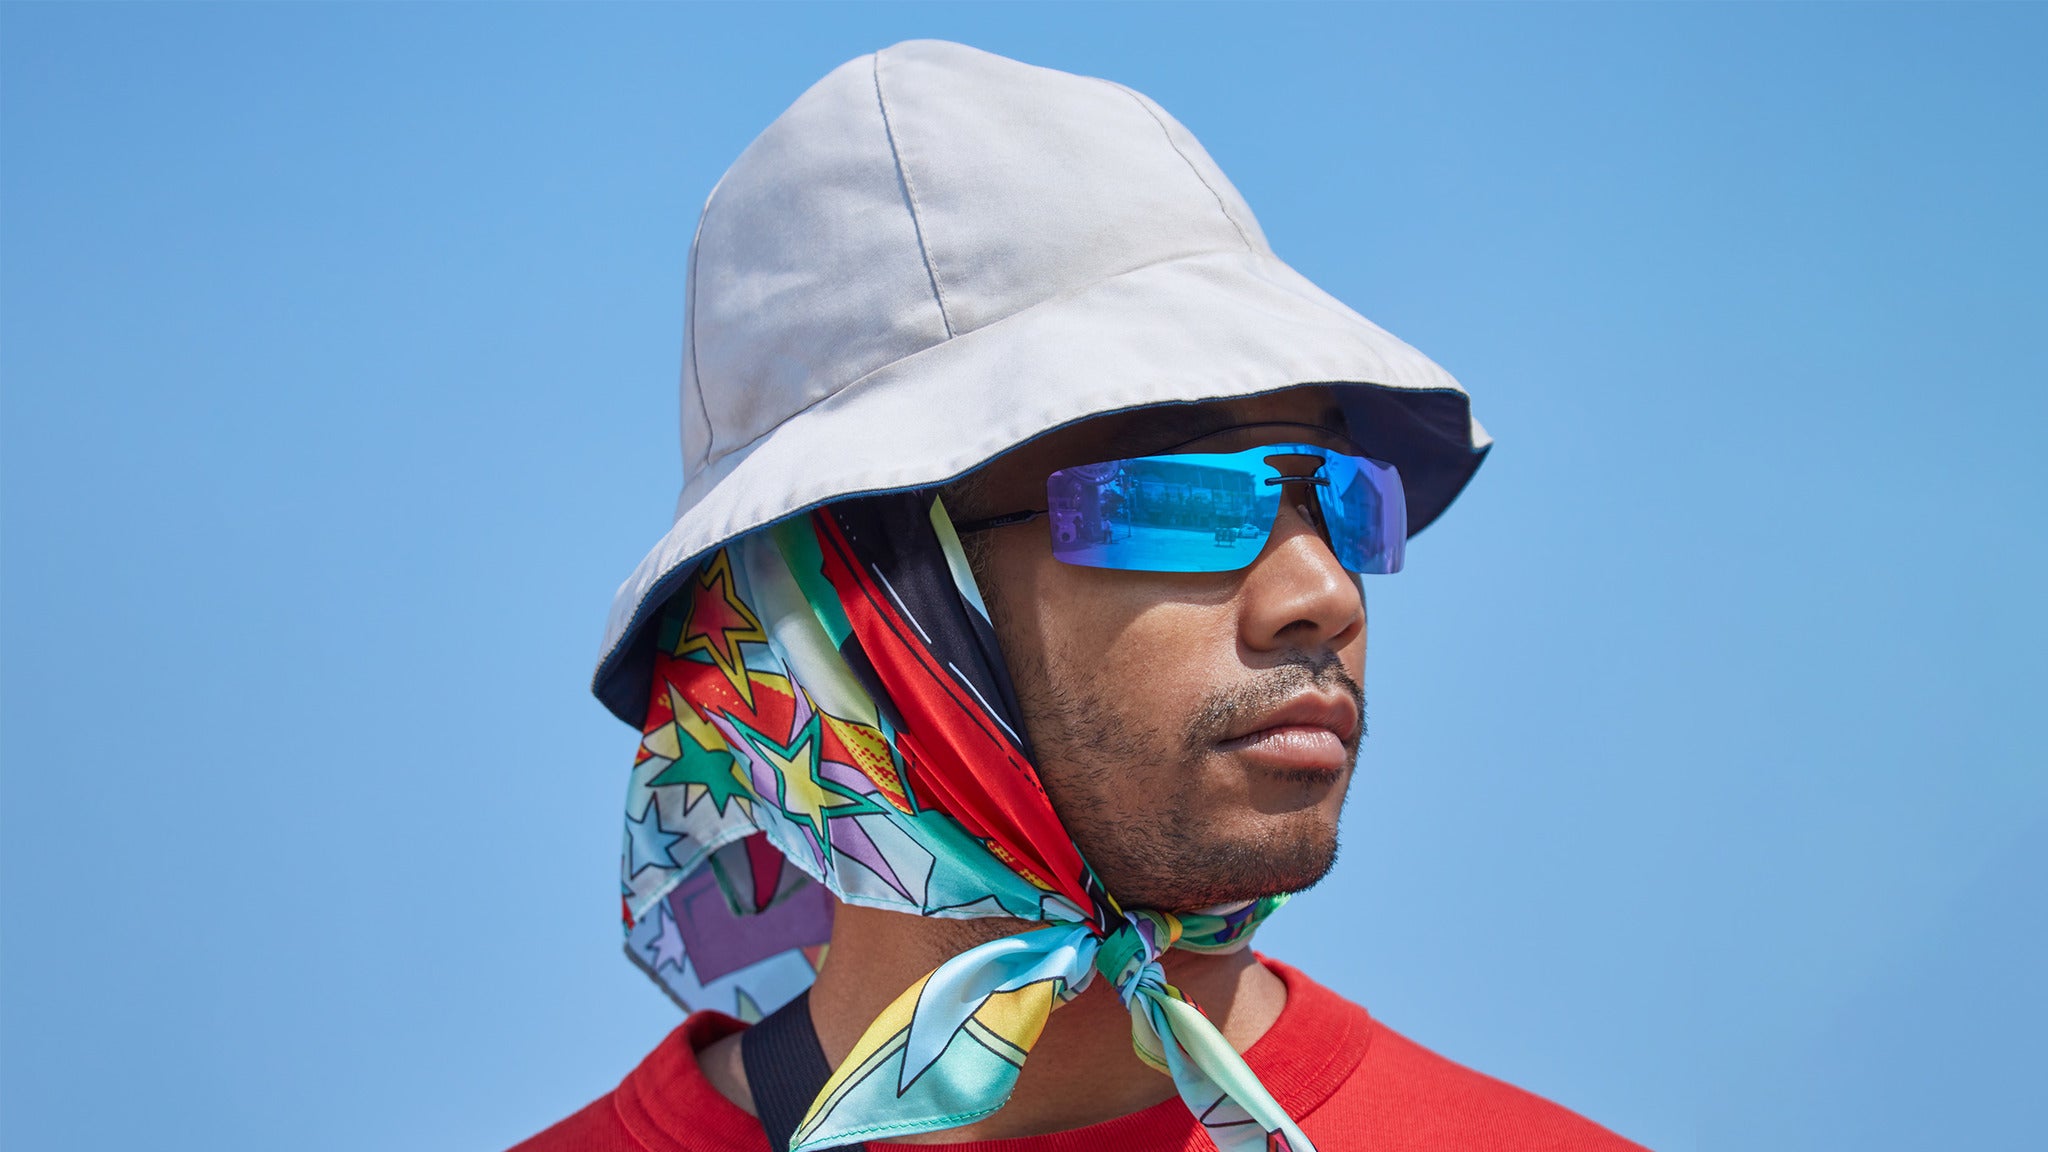 Toro y Moi in Hollywood promo photo for Spotify presale offer code